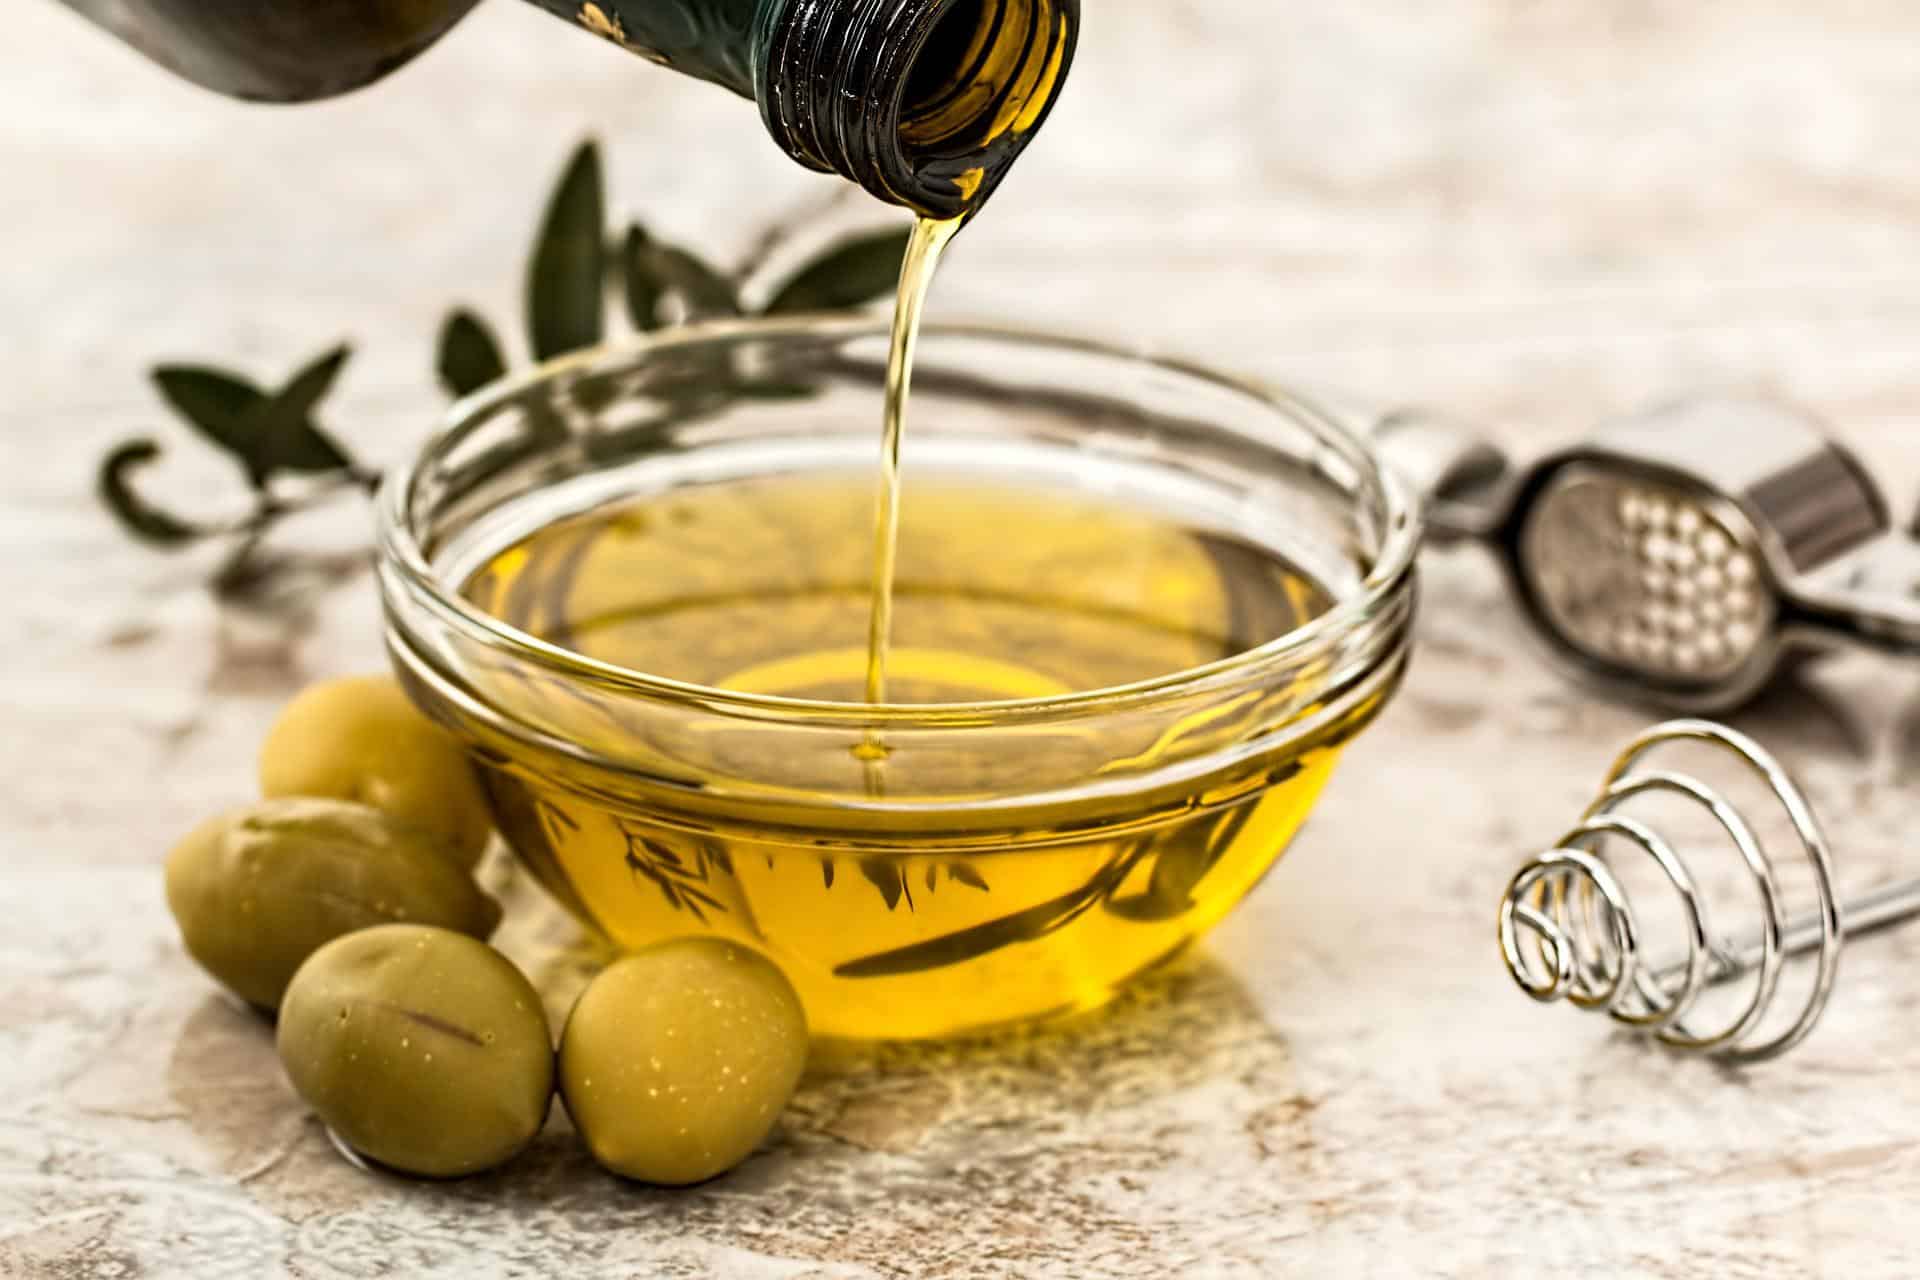 11 Healthy Vegetable Oils for Cooking